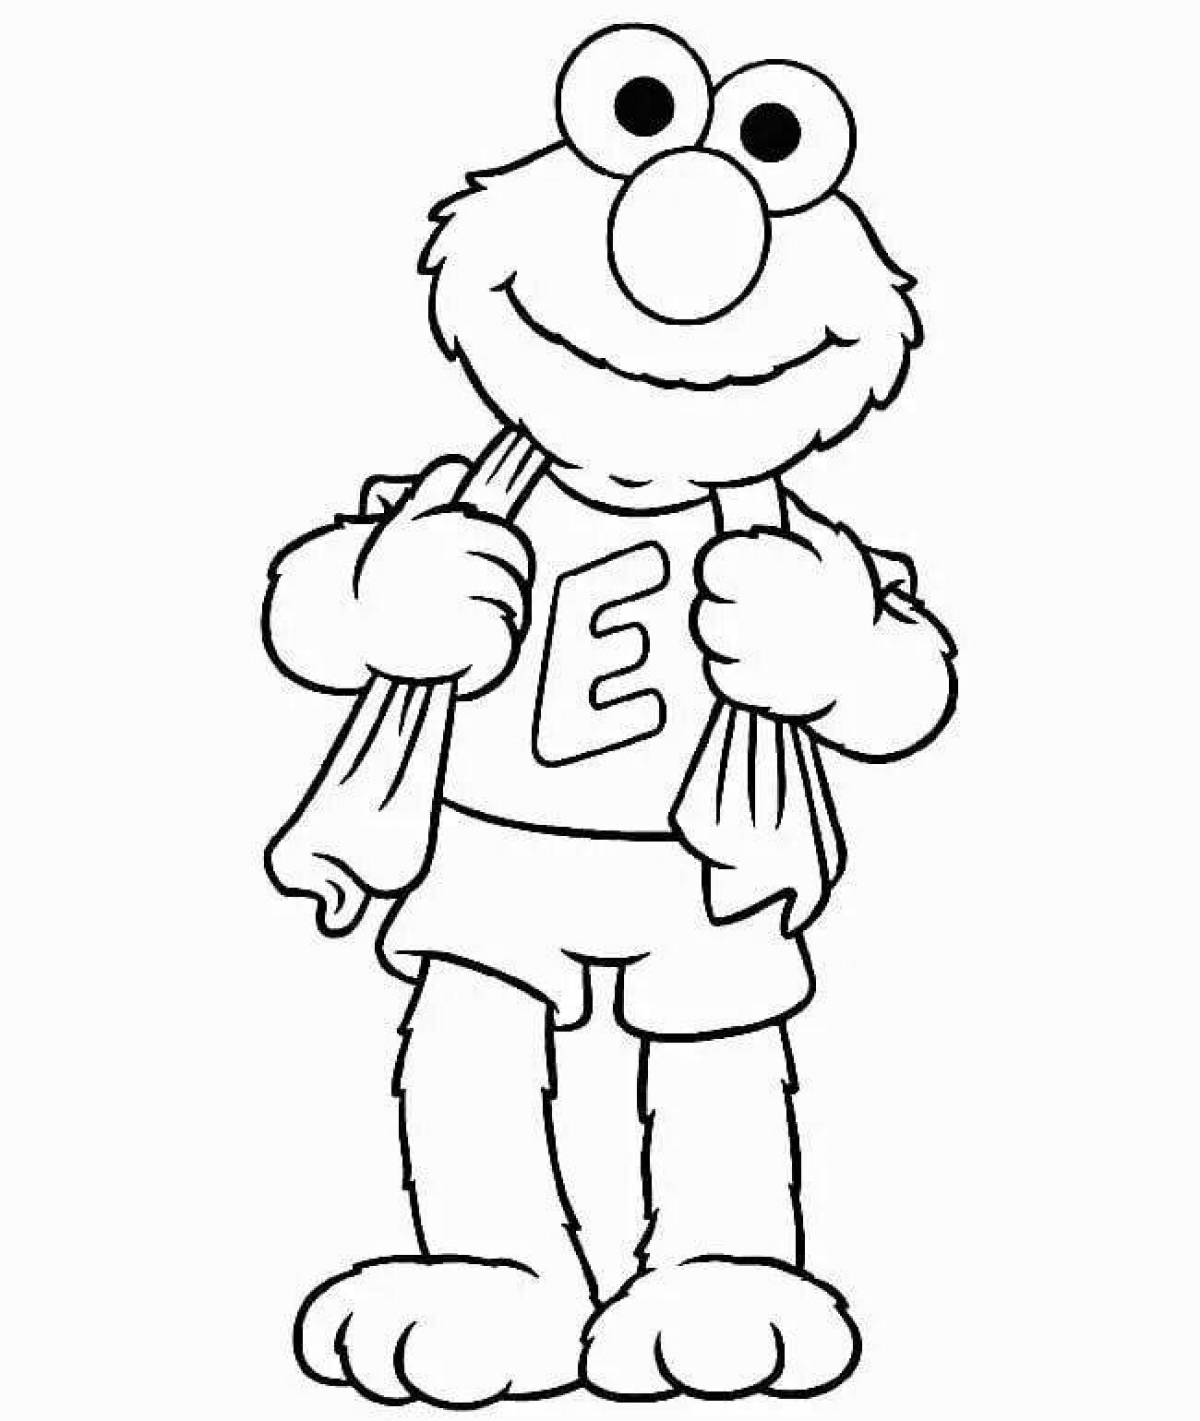 Coloring page elmo leaving